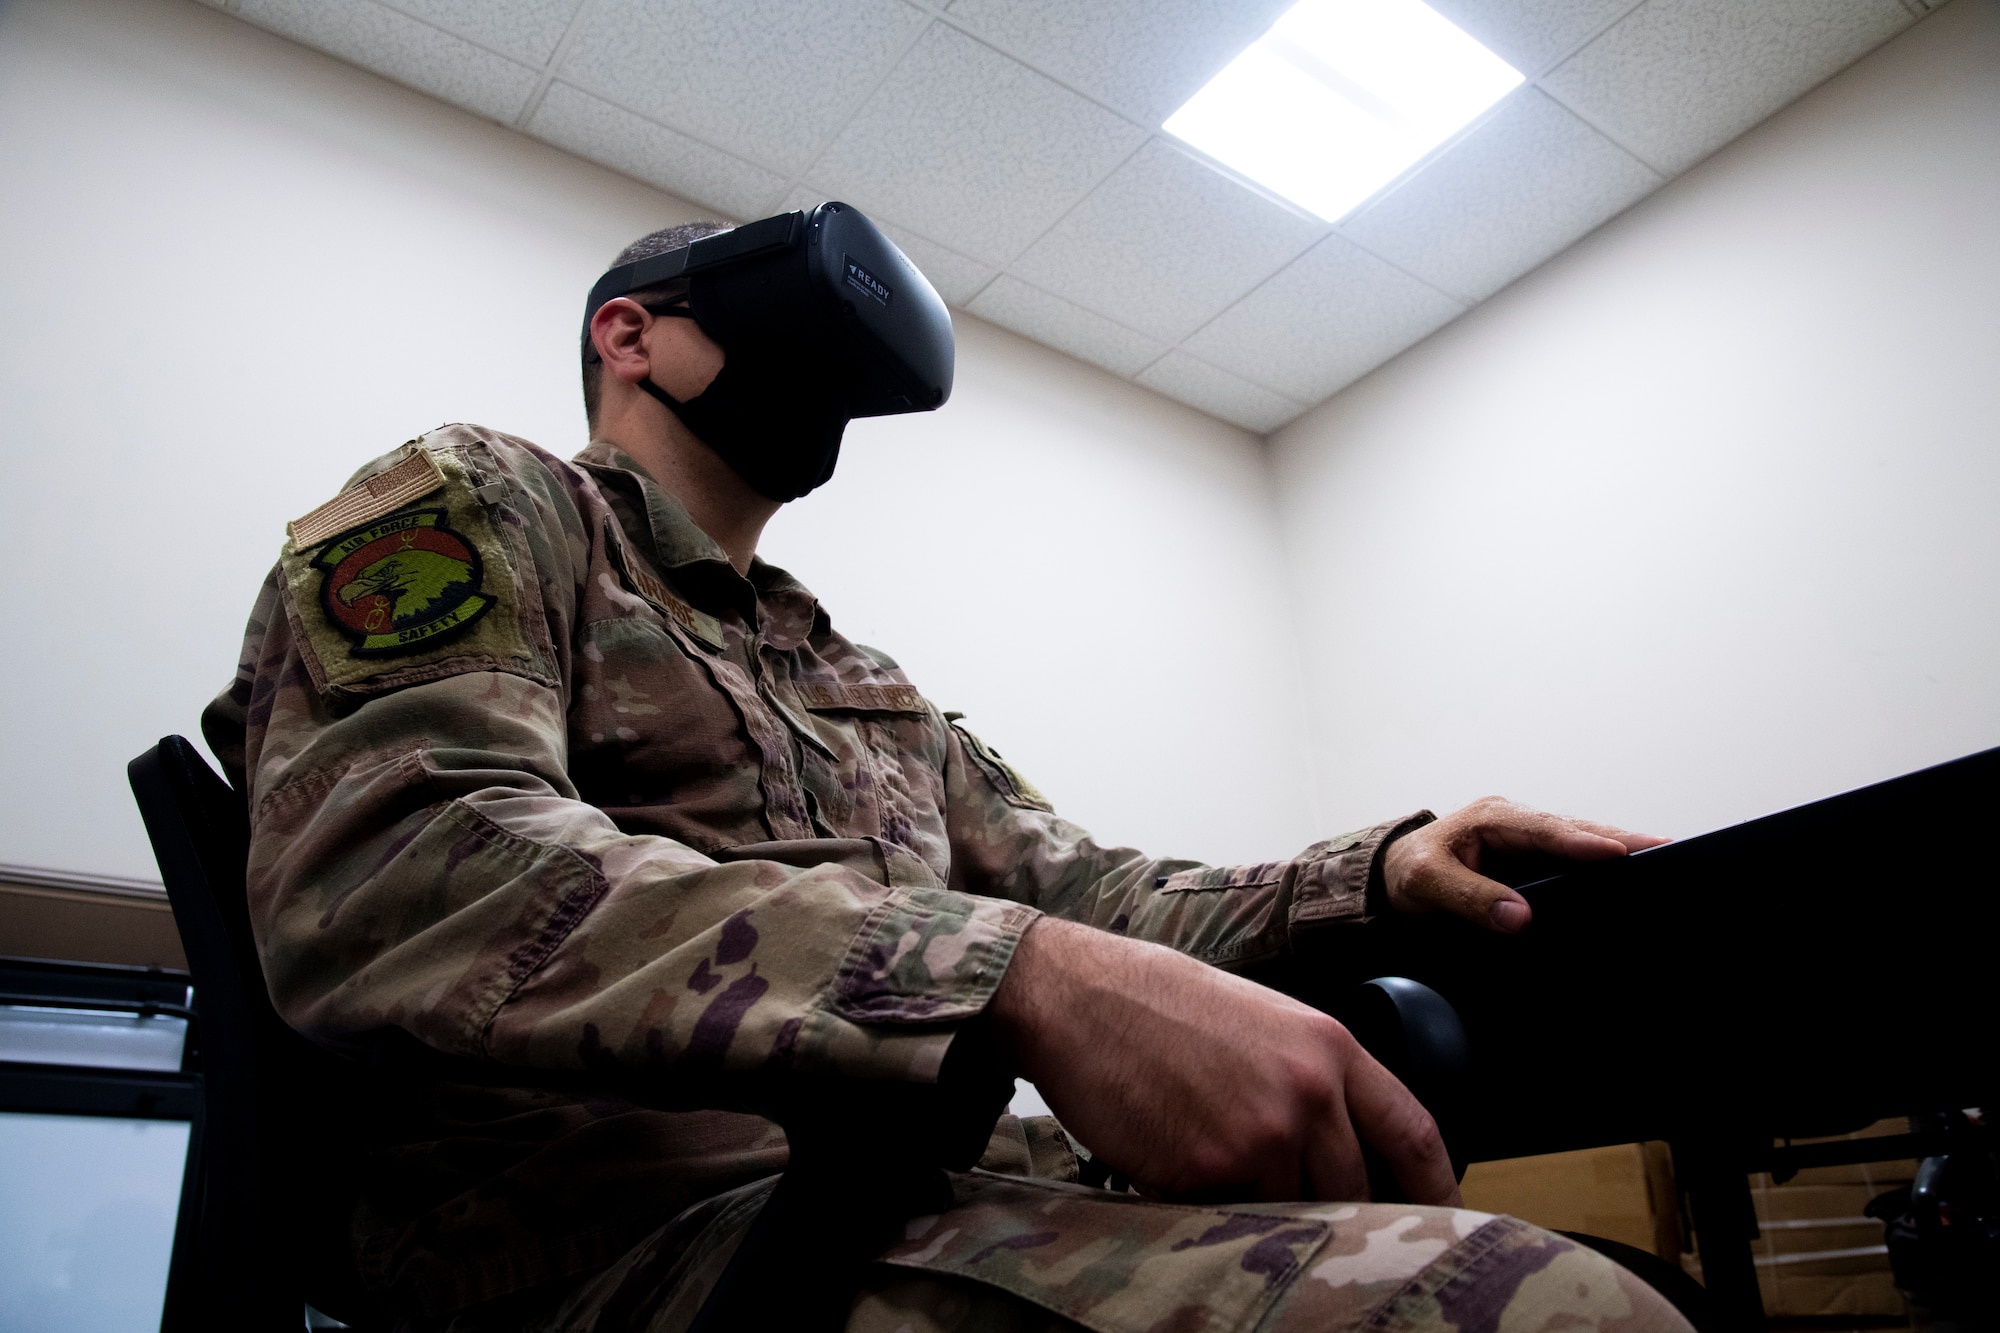 An Airman from the 6th Air Refueling Wing participates in a Virtual Reality suicide prevention training at MacDill Air Force Base, Florida, on Sept. 29, 2021.